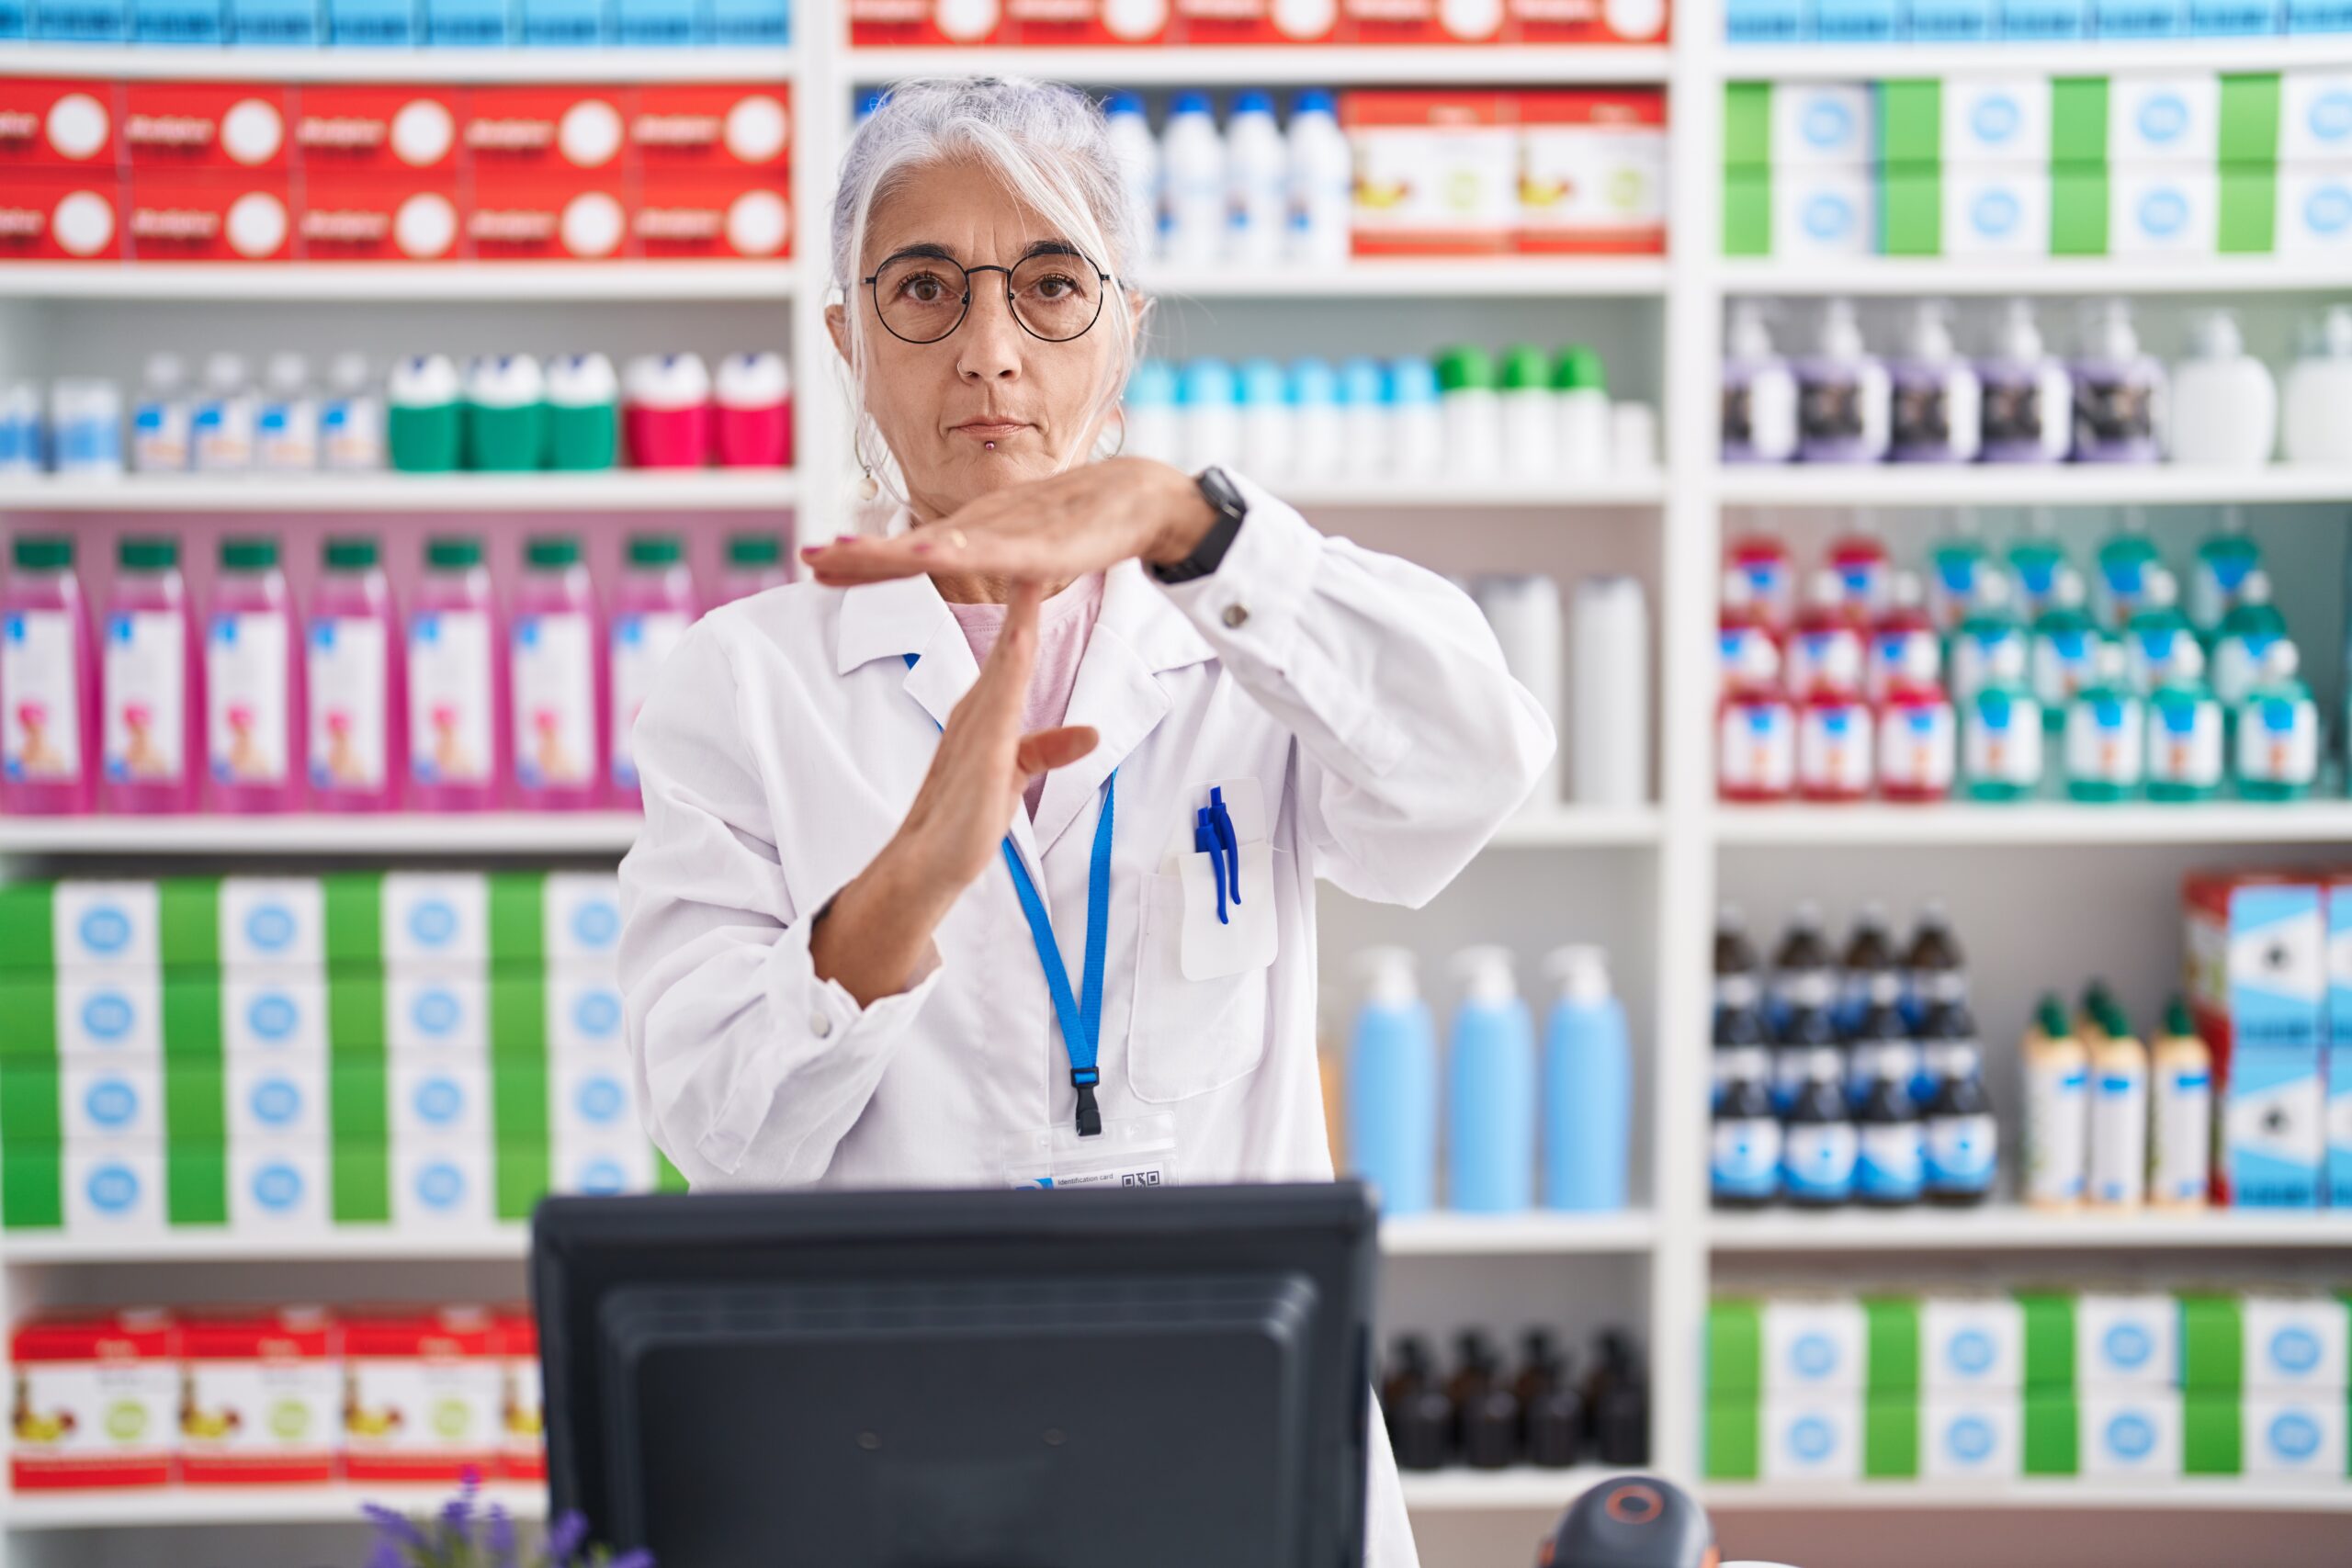 Female pharmacist holding her hands up making the time-out sign because she is frustrated with receiving so many checks for her expired products